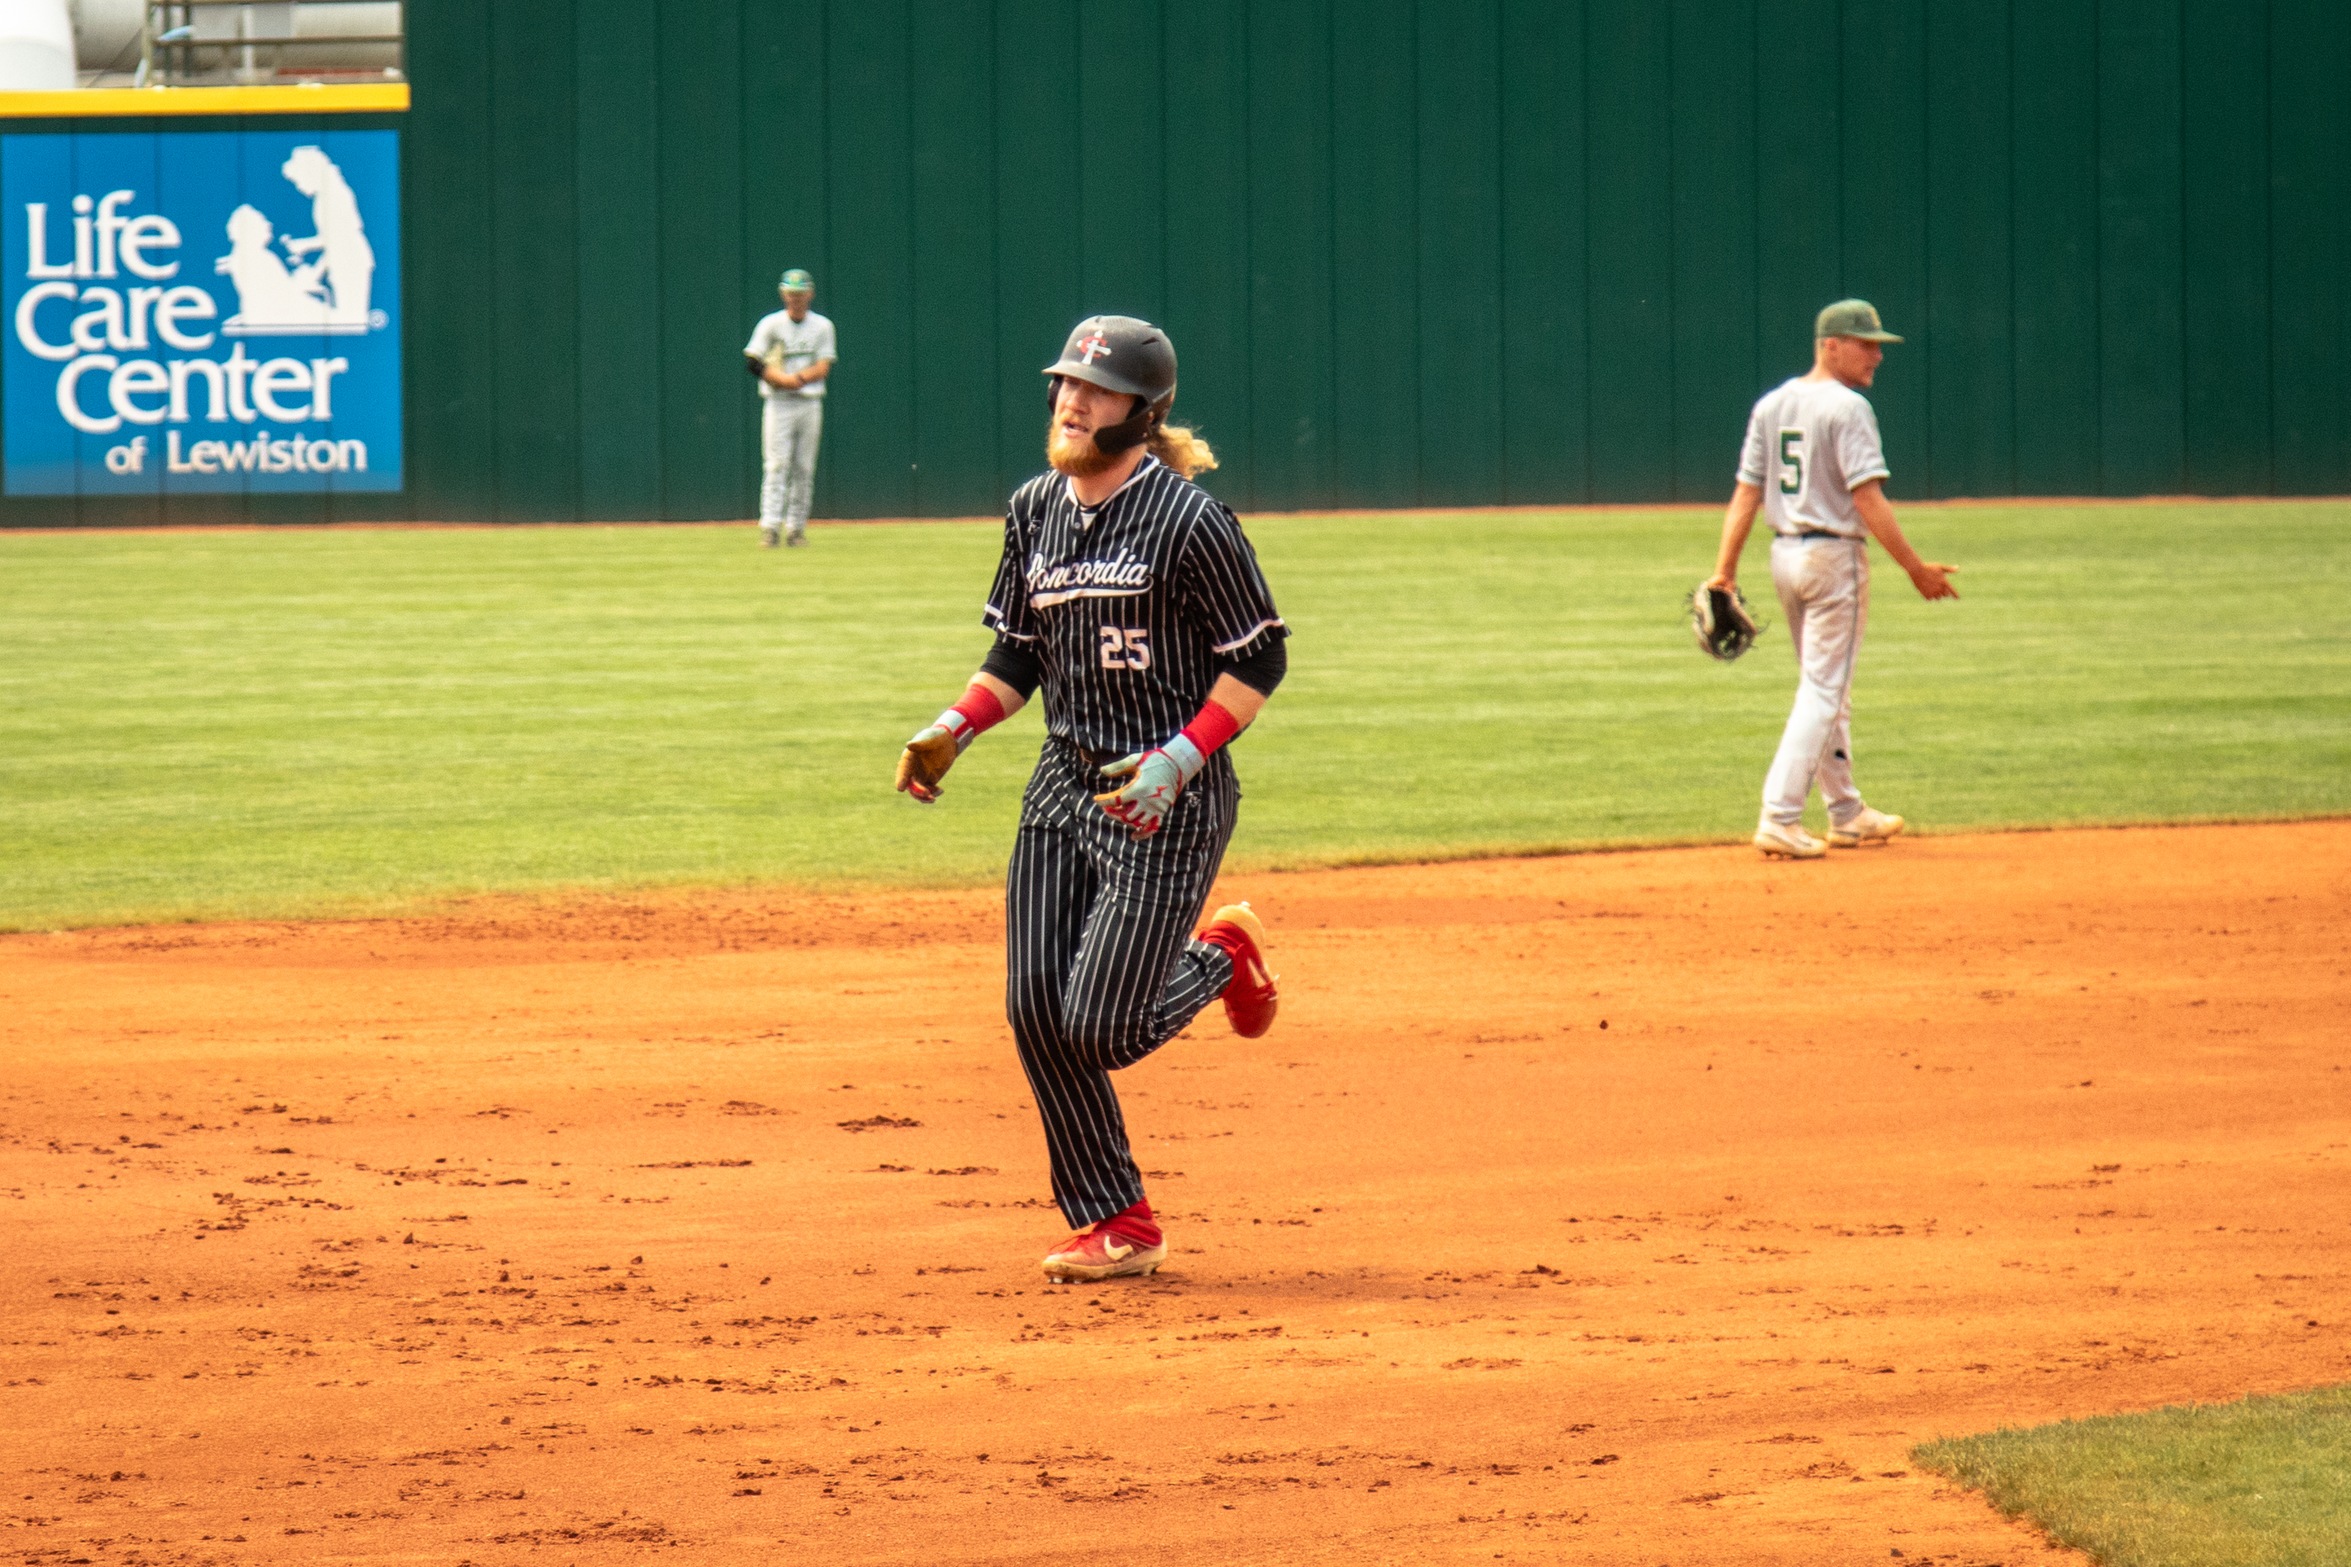 Baseball comes up short in series finale at Shawnee State